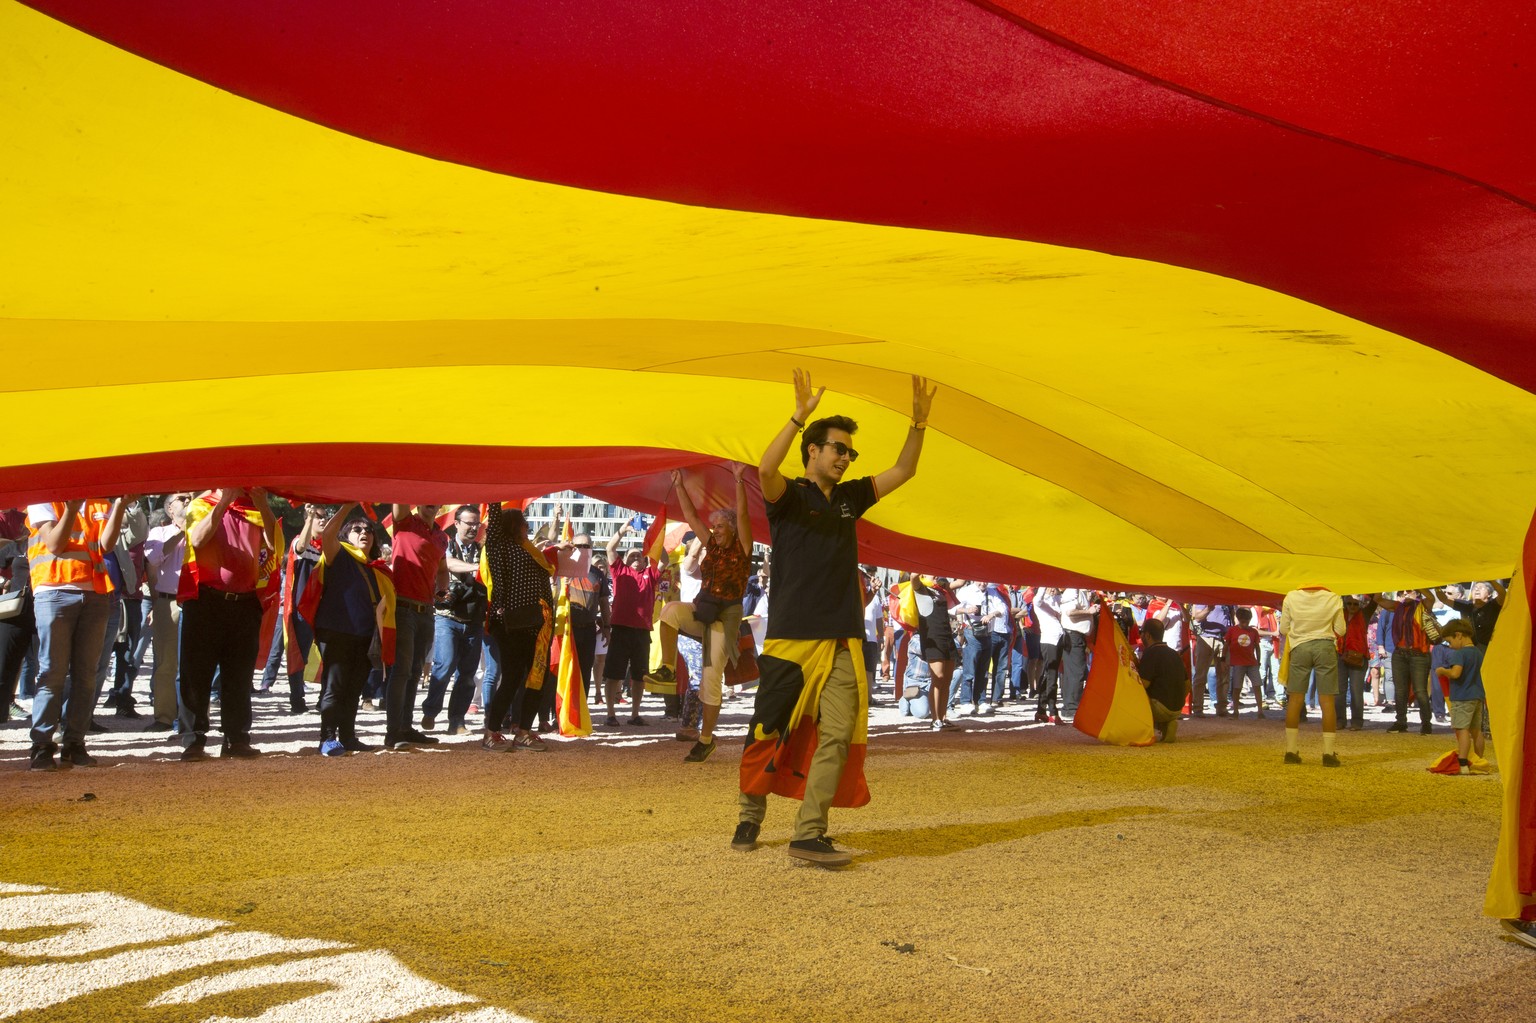 A youth walks under a giant Spanish flag in Madrid, Spain, Saturday, Oct. 7, 2017. Thousands of pro-Spanish unity supporters donning Spanish flags have rallied in a central Madrid plaza to protest the ...